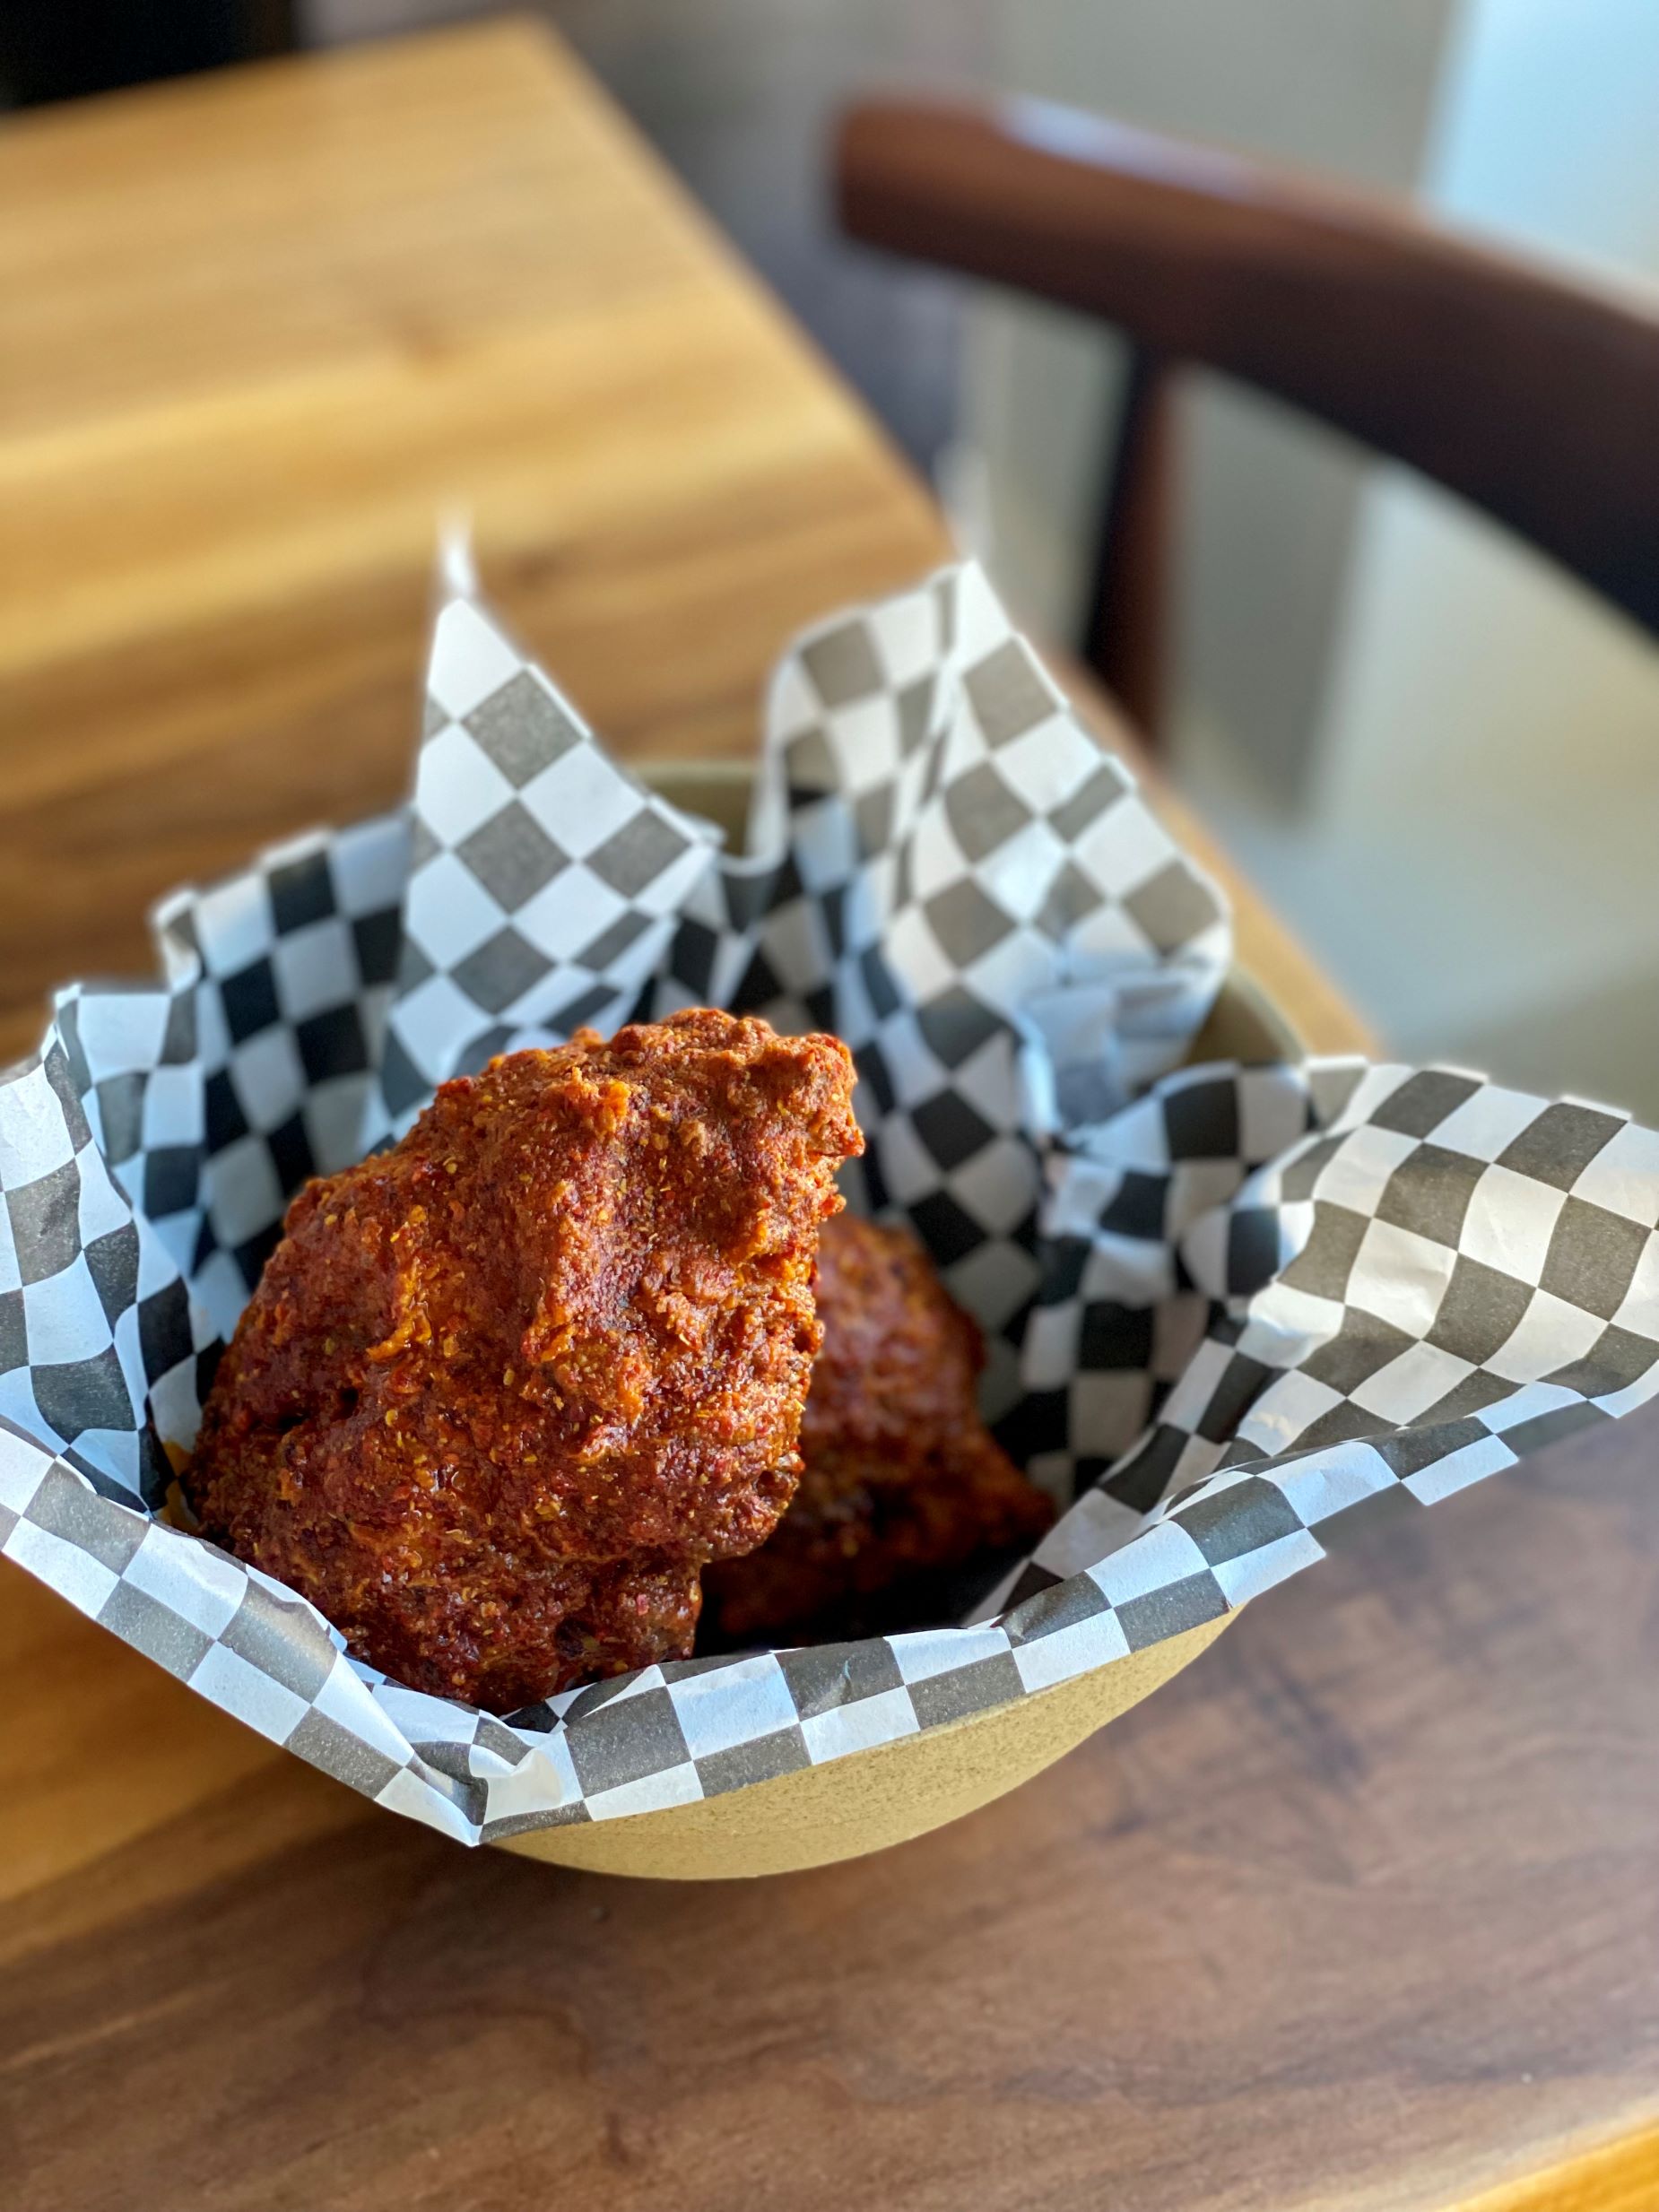 An image of Chef Eric' Huang's Chili Fried Chicken.